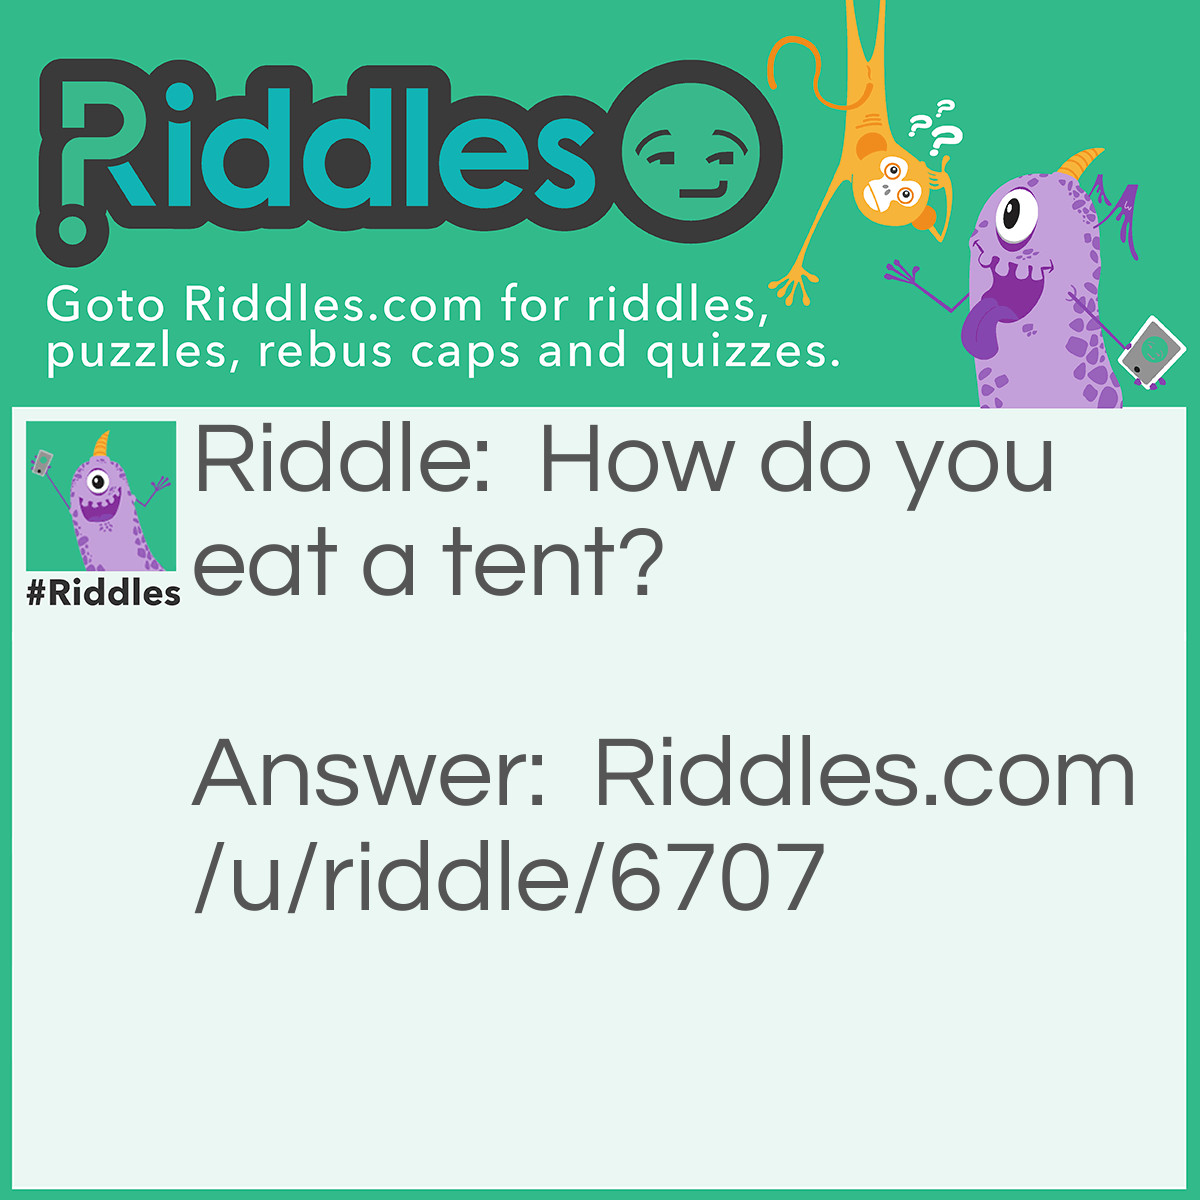 Riddle: How do you eat a tent? Answer: With your mouth!